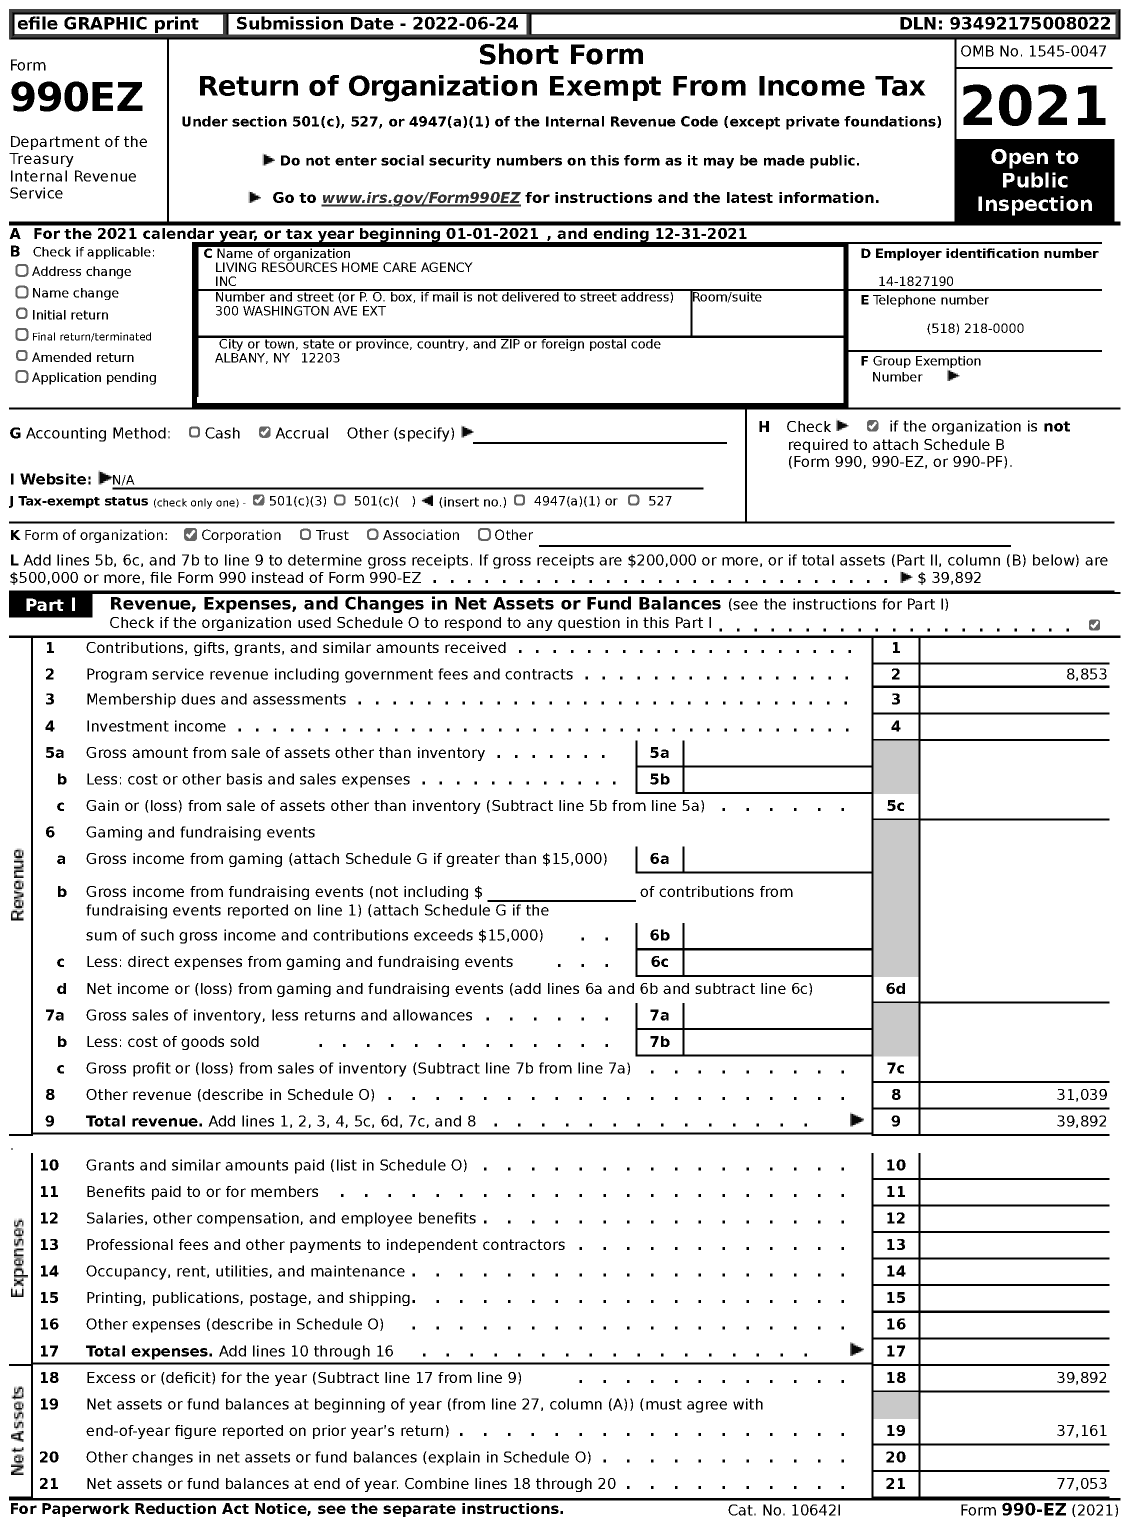 Image of first page of 2021 Form 990EZ for Living Resources Home Care Agency